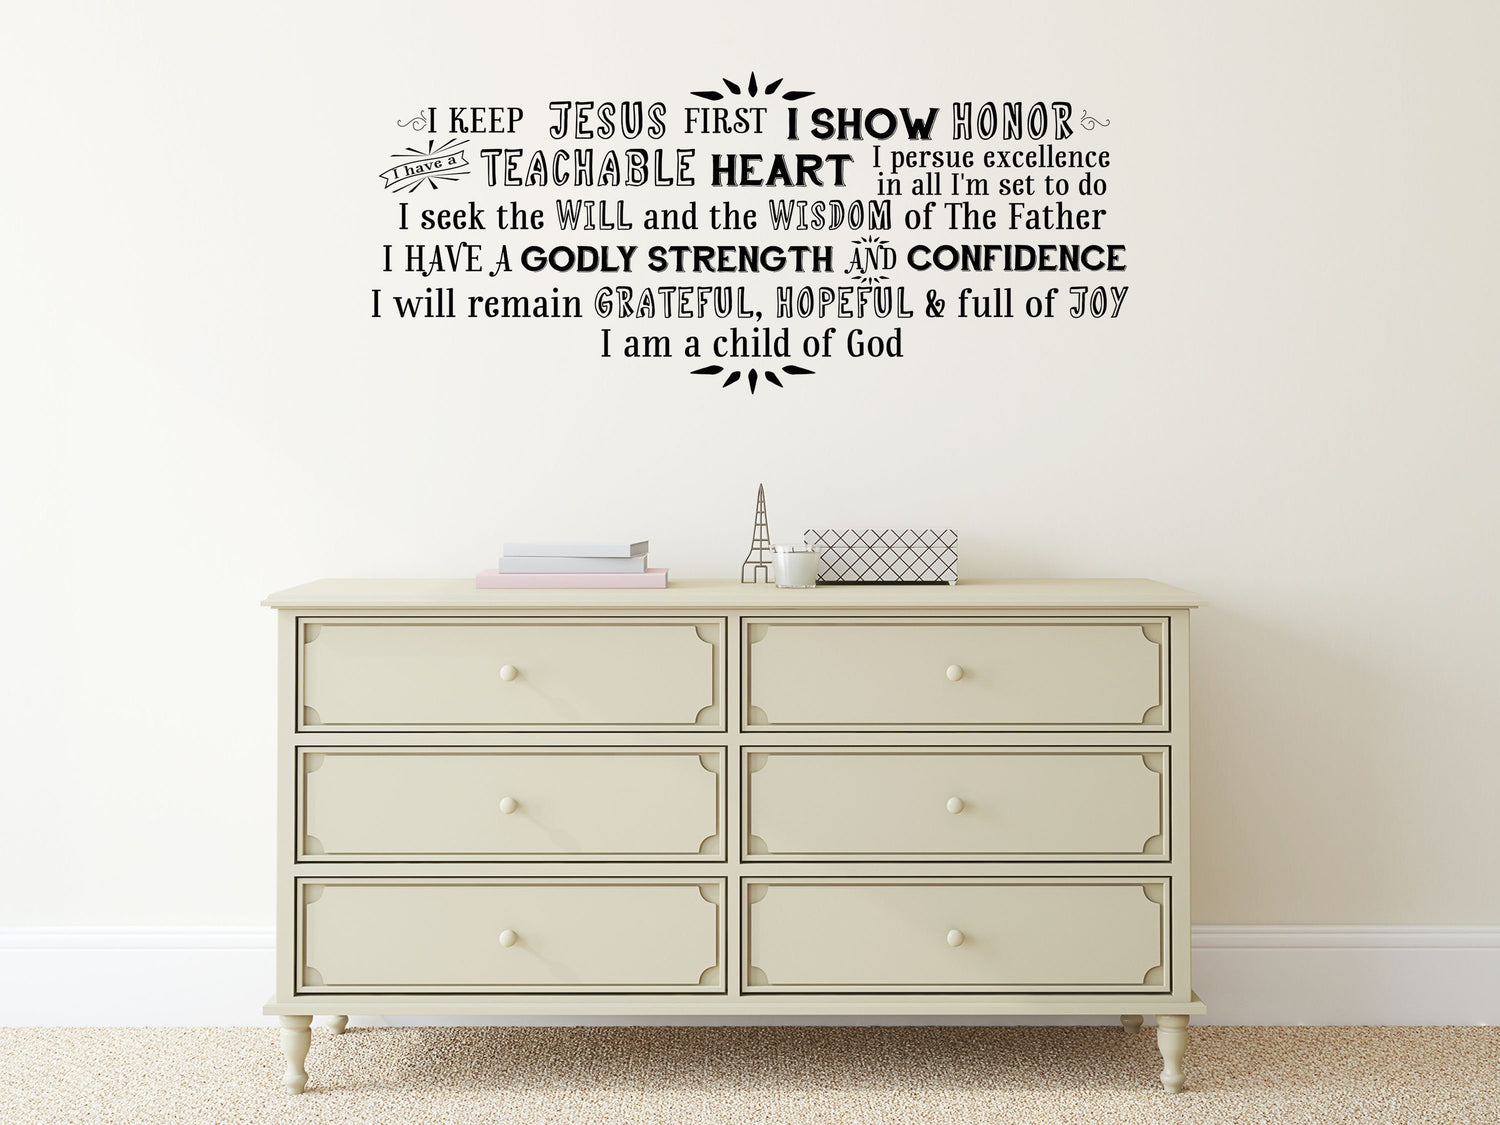 Jesus Vinyl Wall Decal Word Cloud - Godly Inspirational Wisdom Confidence Decal Vinyl Wall Decal Done 